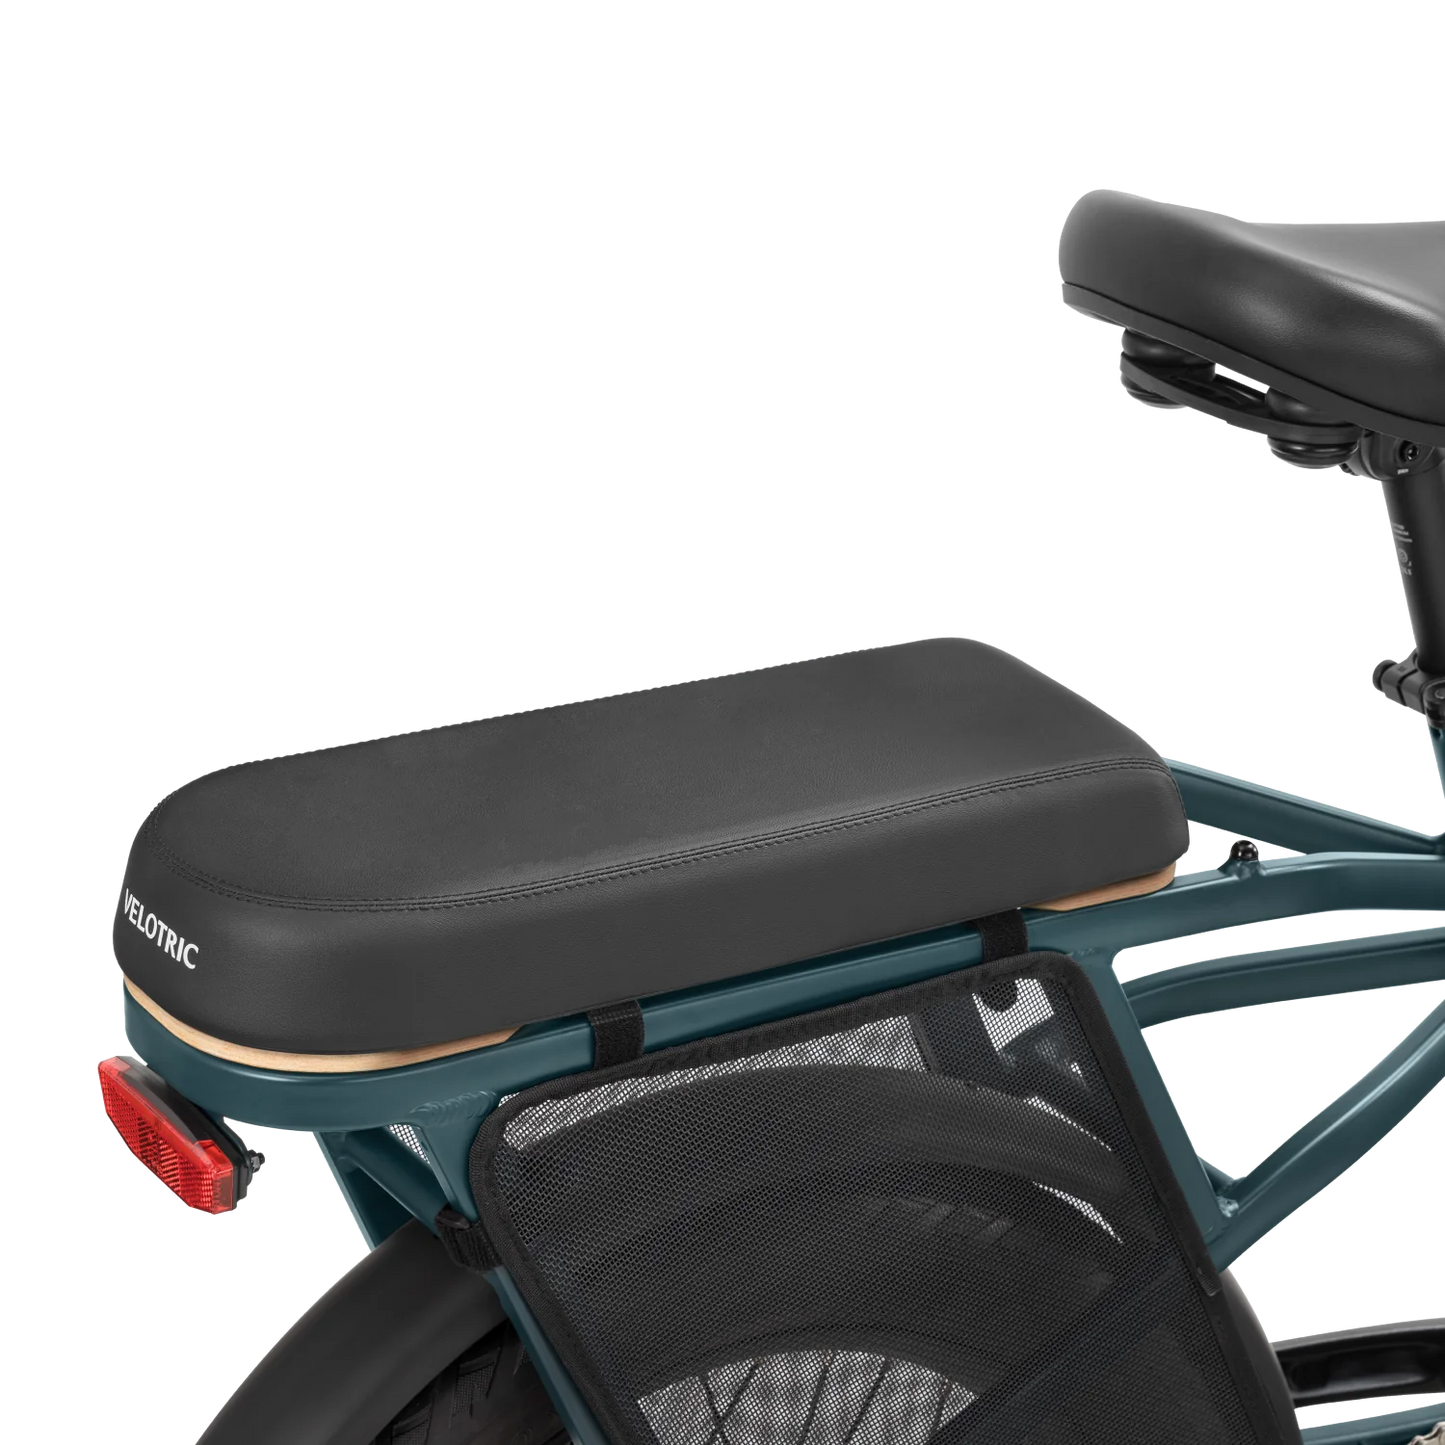 Close-up view of a Velotric Go 1's rear seat and frame, featuring a Seat Pad - Velotric Go / Fold with high-elastic sponge and a rear light.